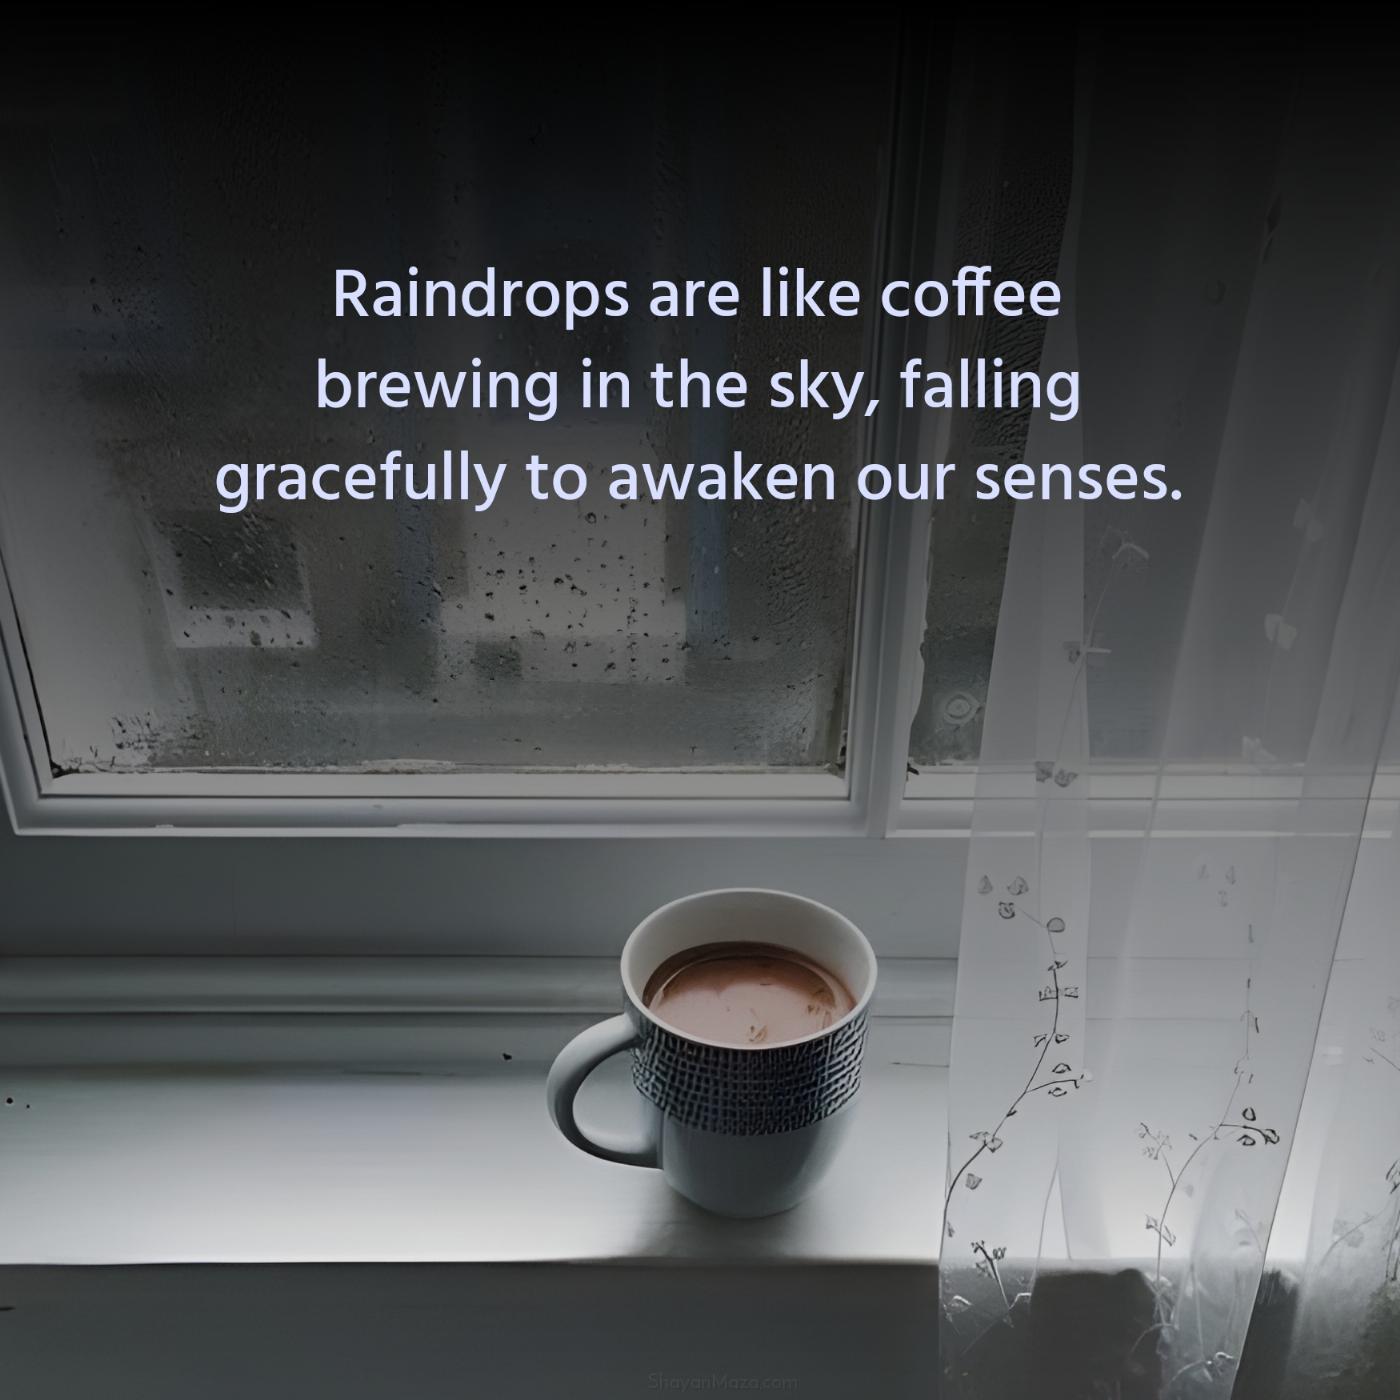 Raindrops are like coffee brewing in the sky falling gracefully